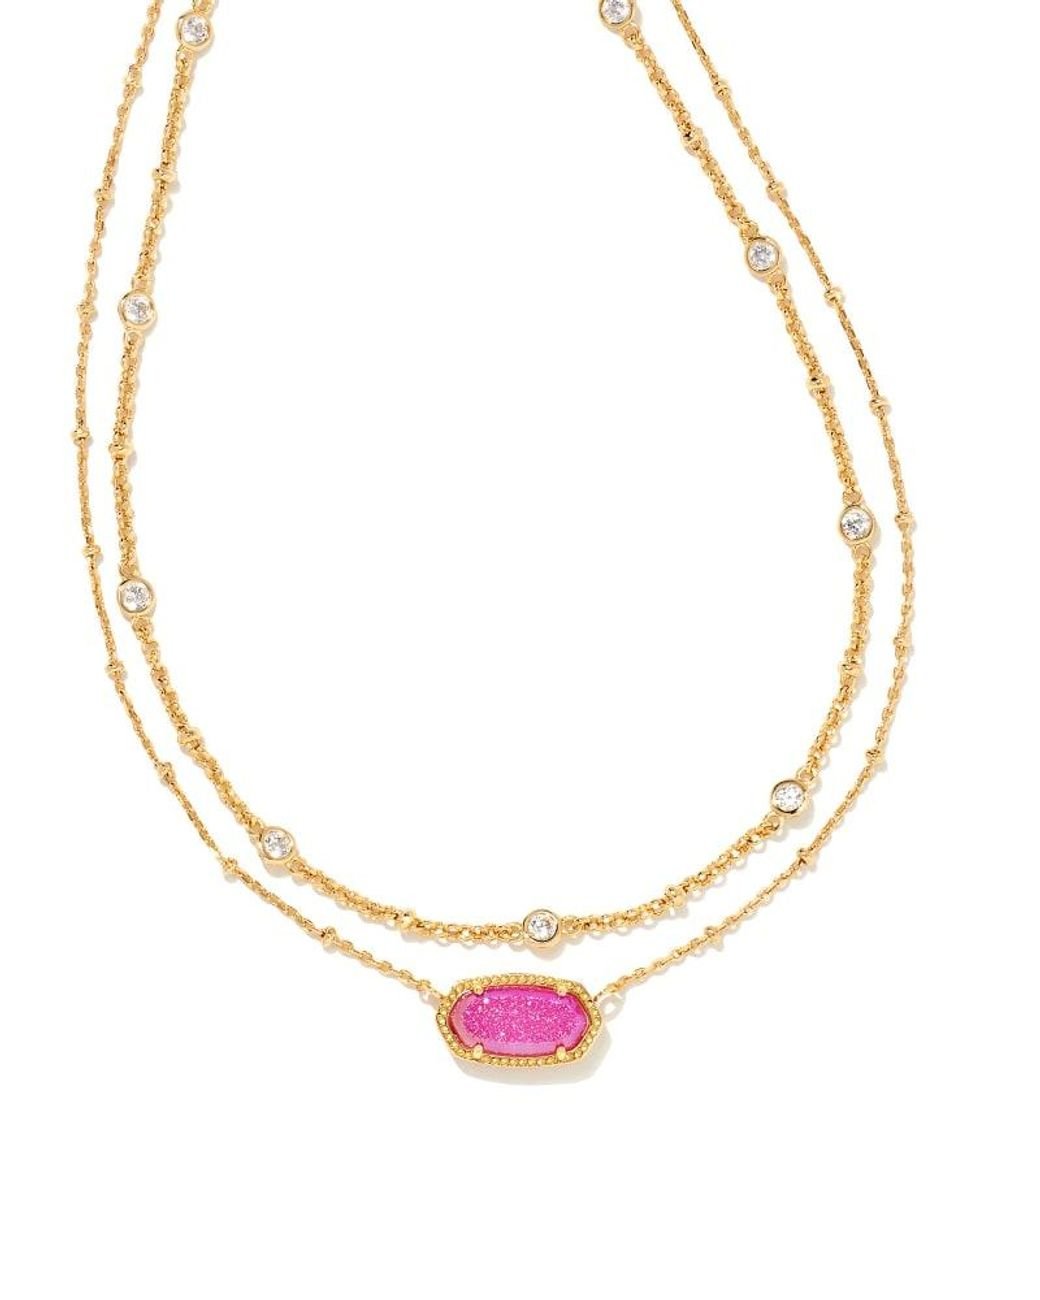 Aggregate more than 80 kendra scott elisa necklace pink latest